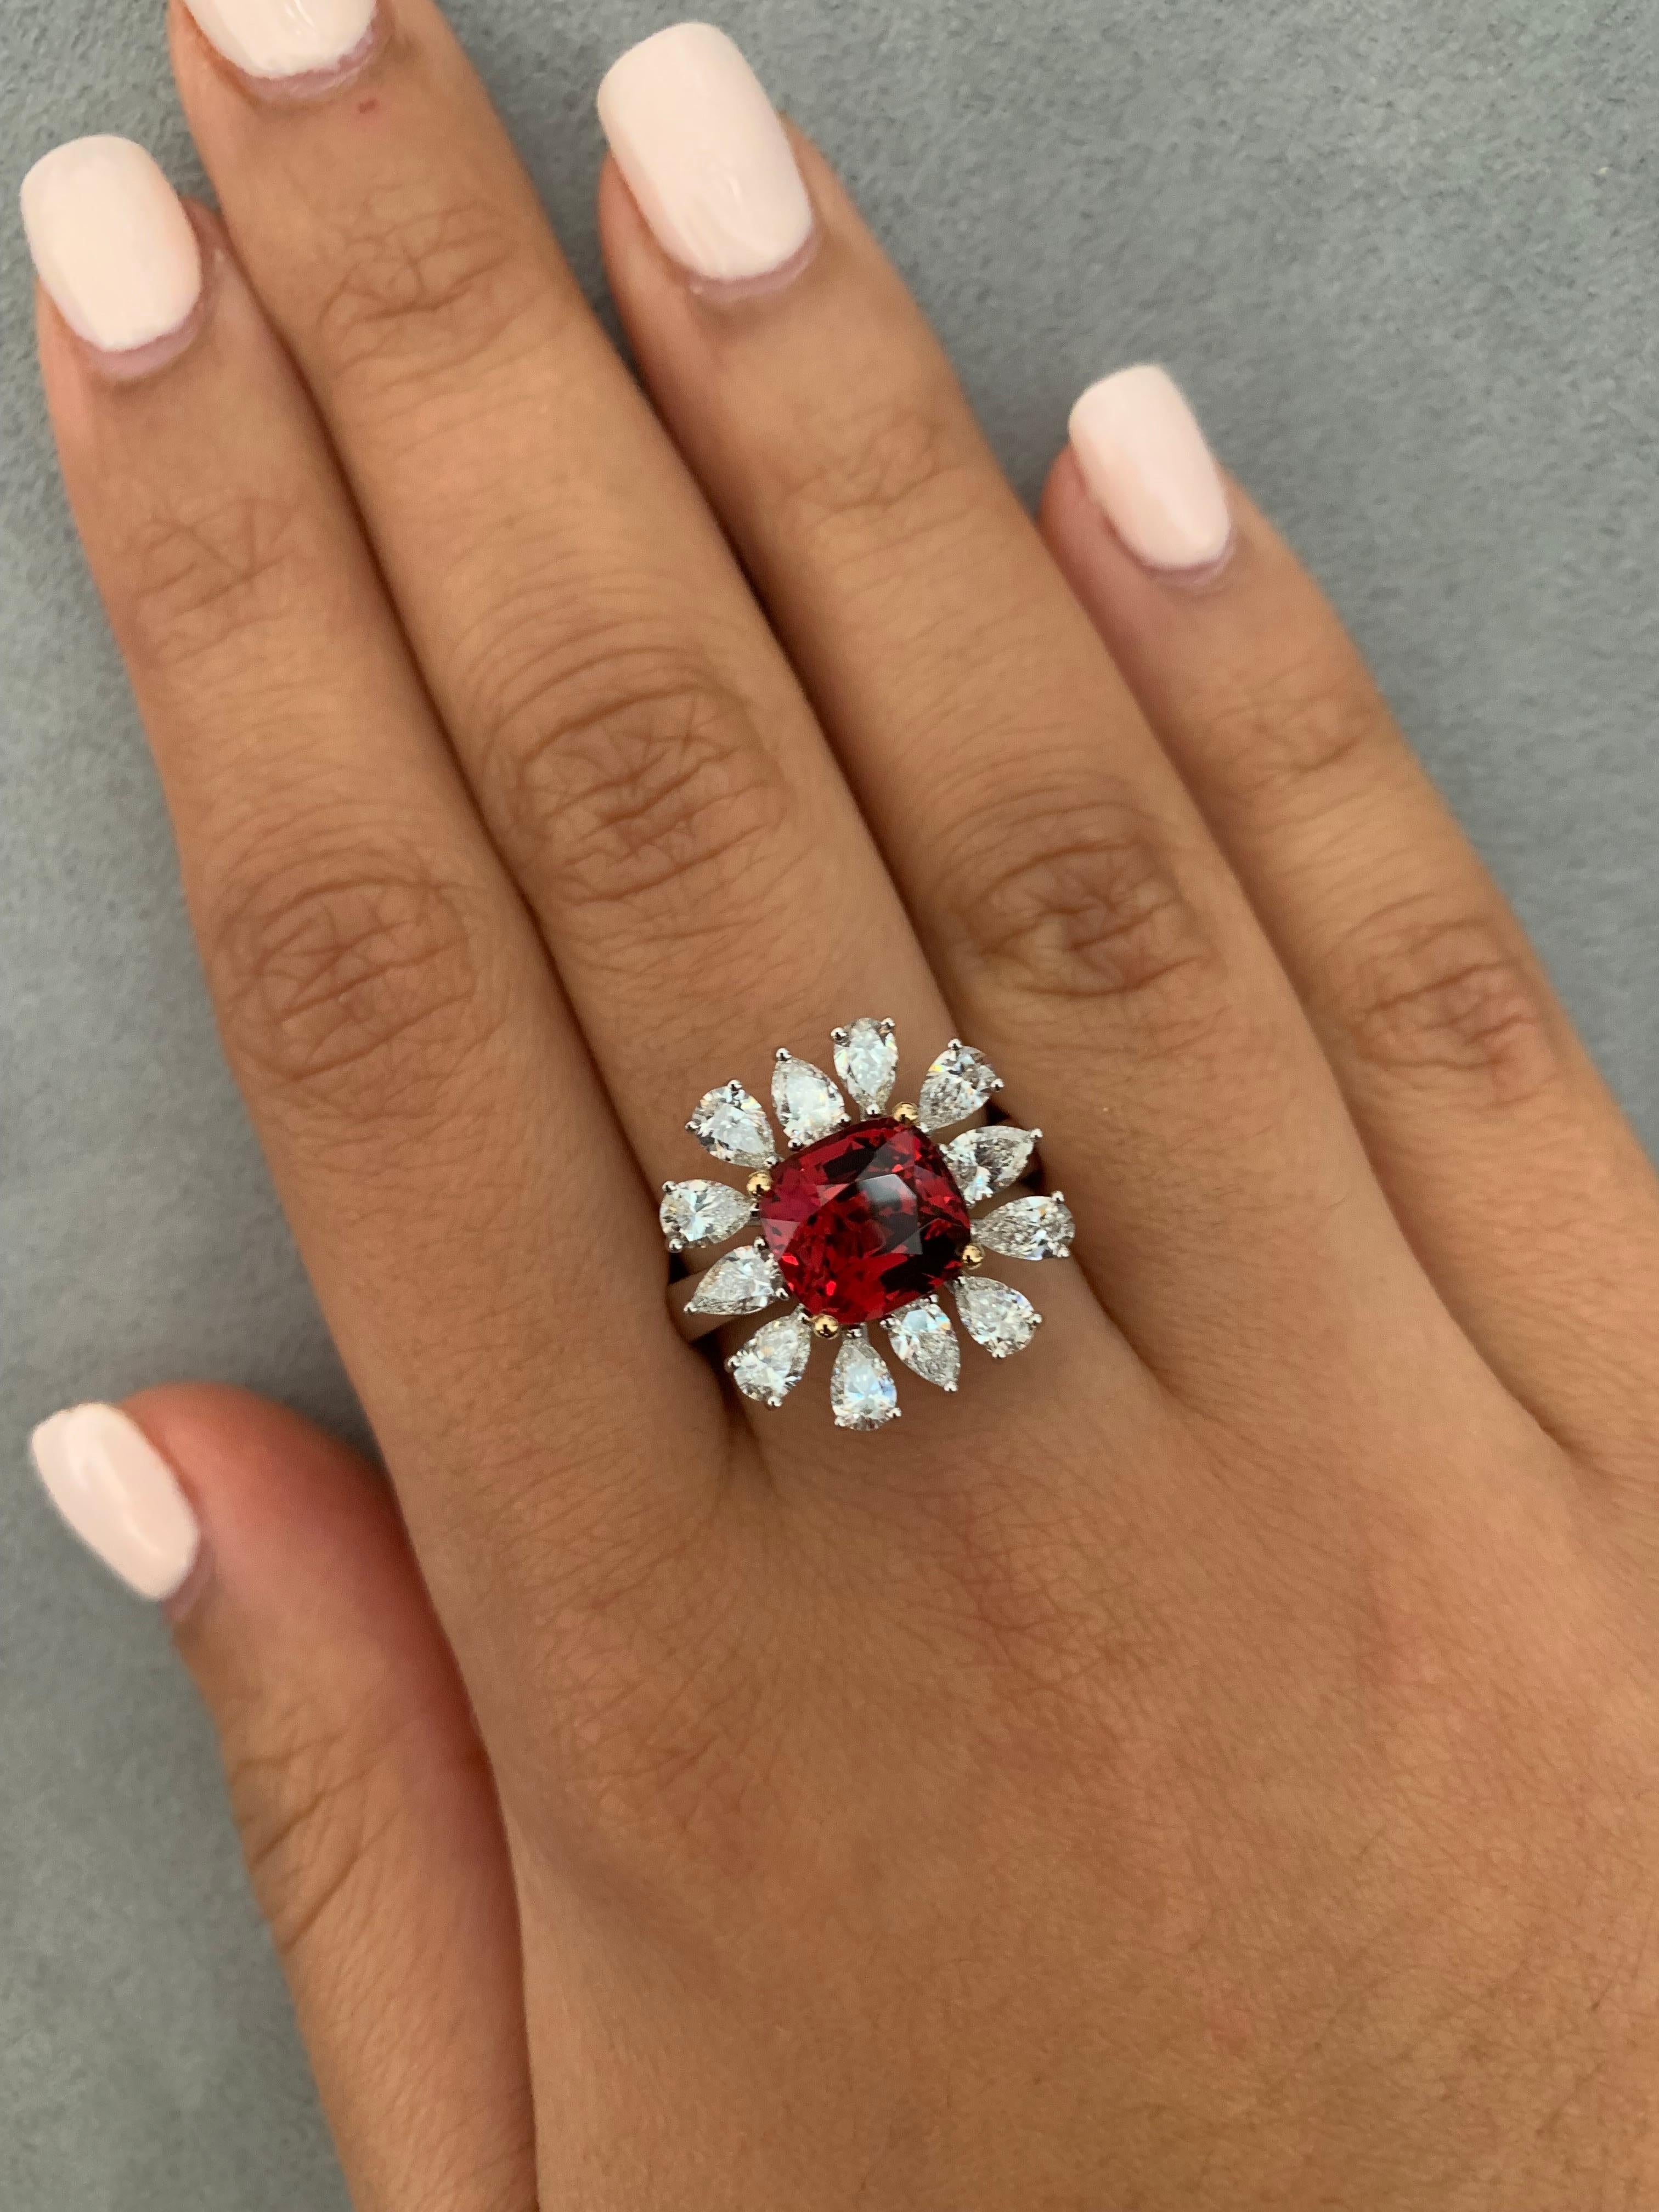 Spinels are a fascinating gemstone with a long history amongst royal jewelry. Burmese red spinels in particular hold great appreciation due to their rich red color often being mistaken for rubies. Sunita Nahata presents an exclusive collection of